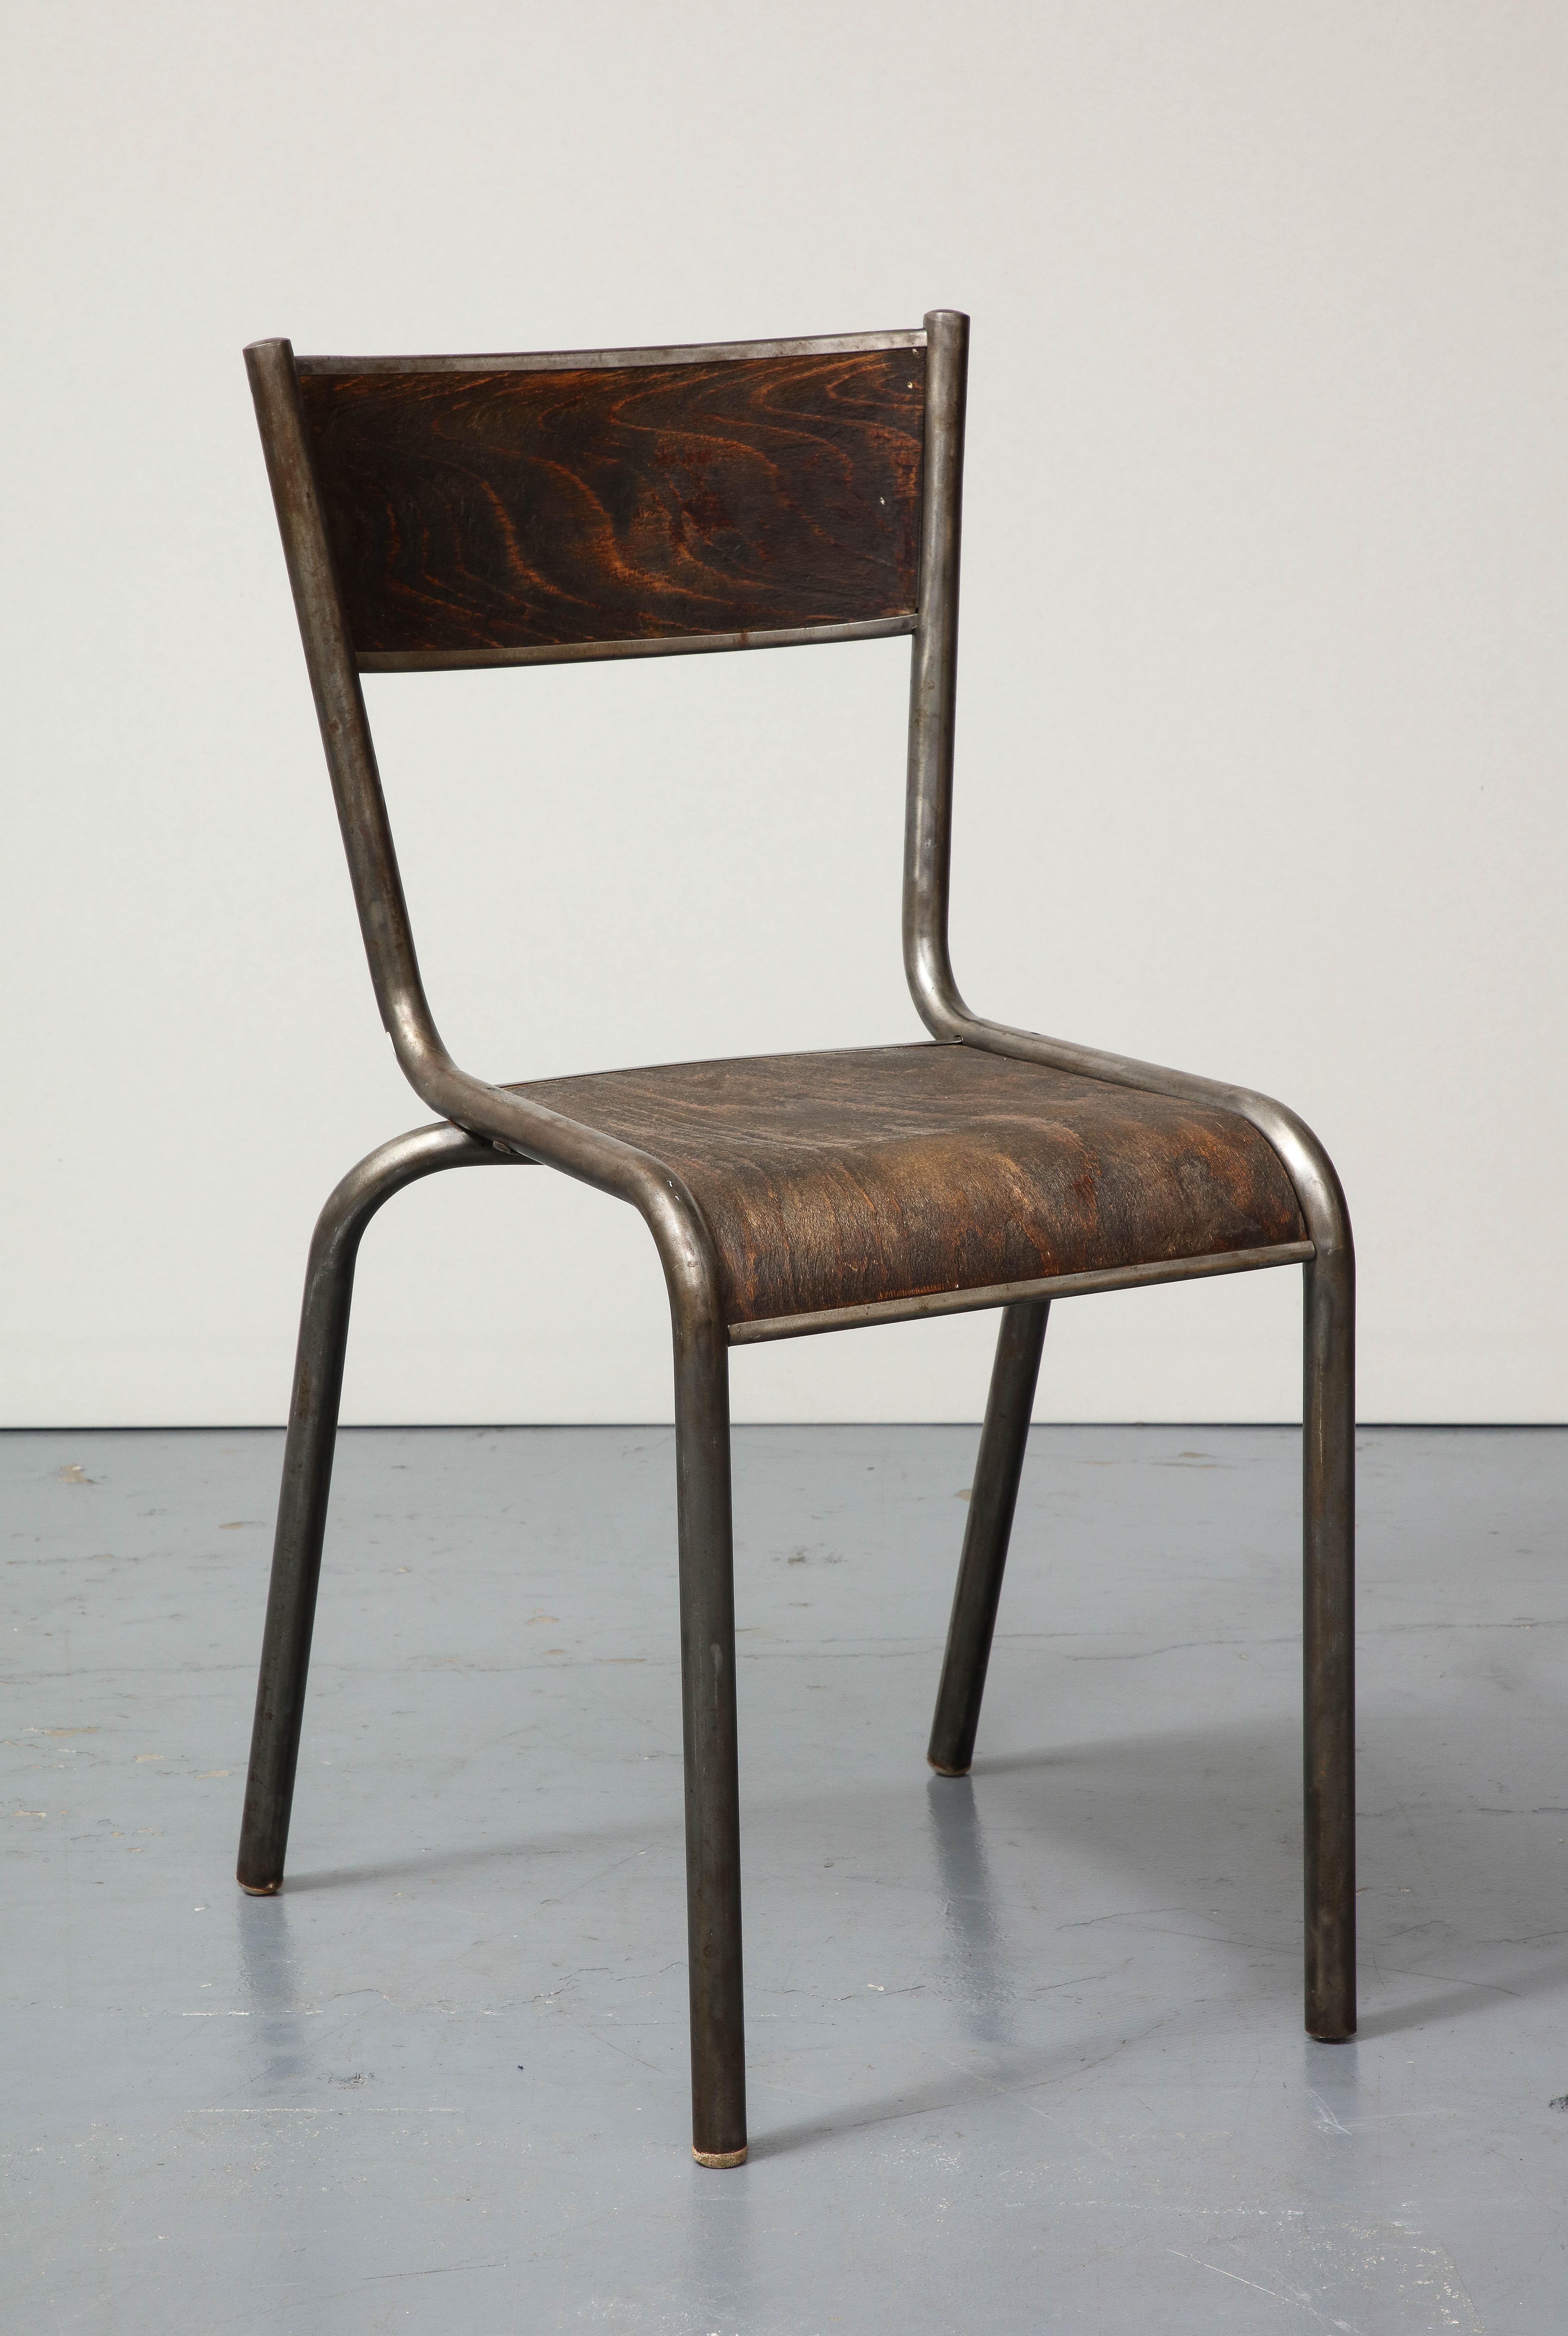 Polished Steel and Bentwood Chair, France, c. 1940 In Good Condition For Sale In New York City, NY